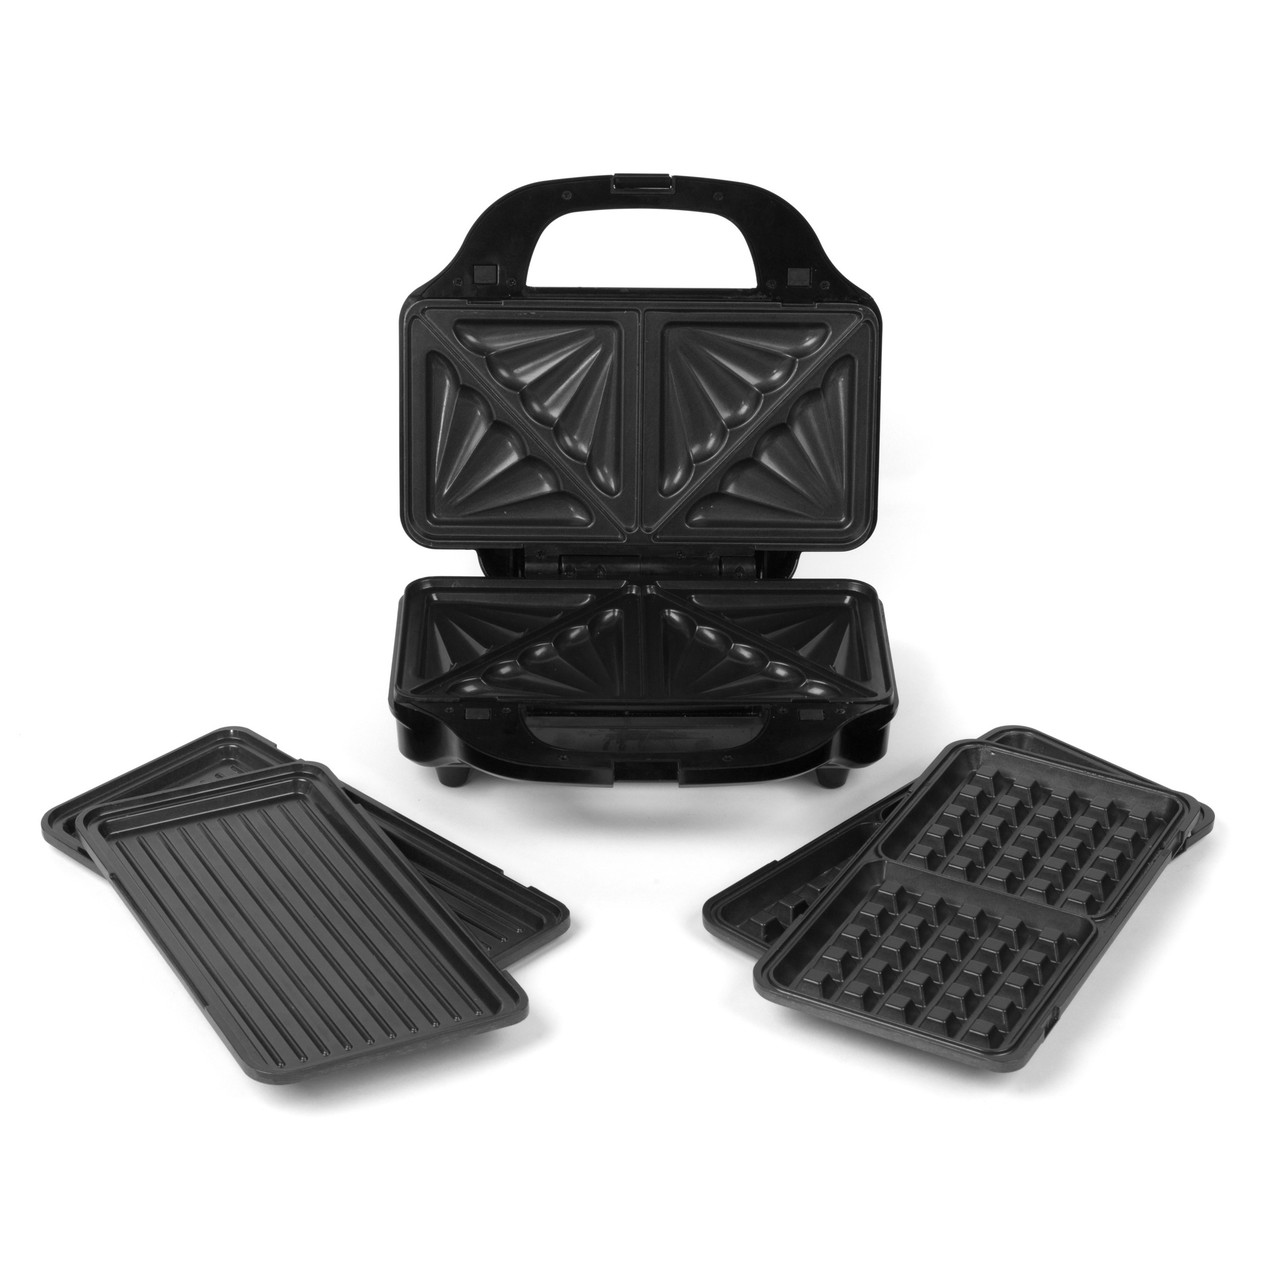 Salter EK1651 3-in-1 Snack Maker with Sandwich Waffle and Doughnut Plates 760 W 